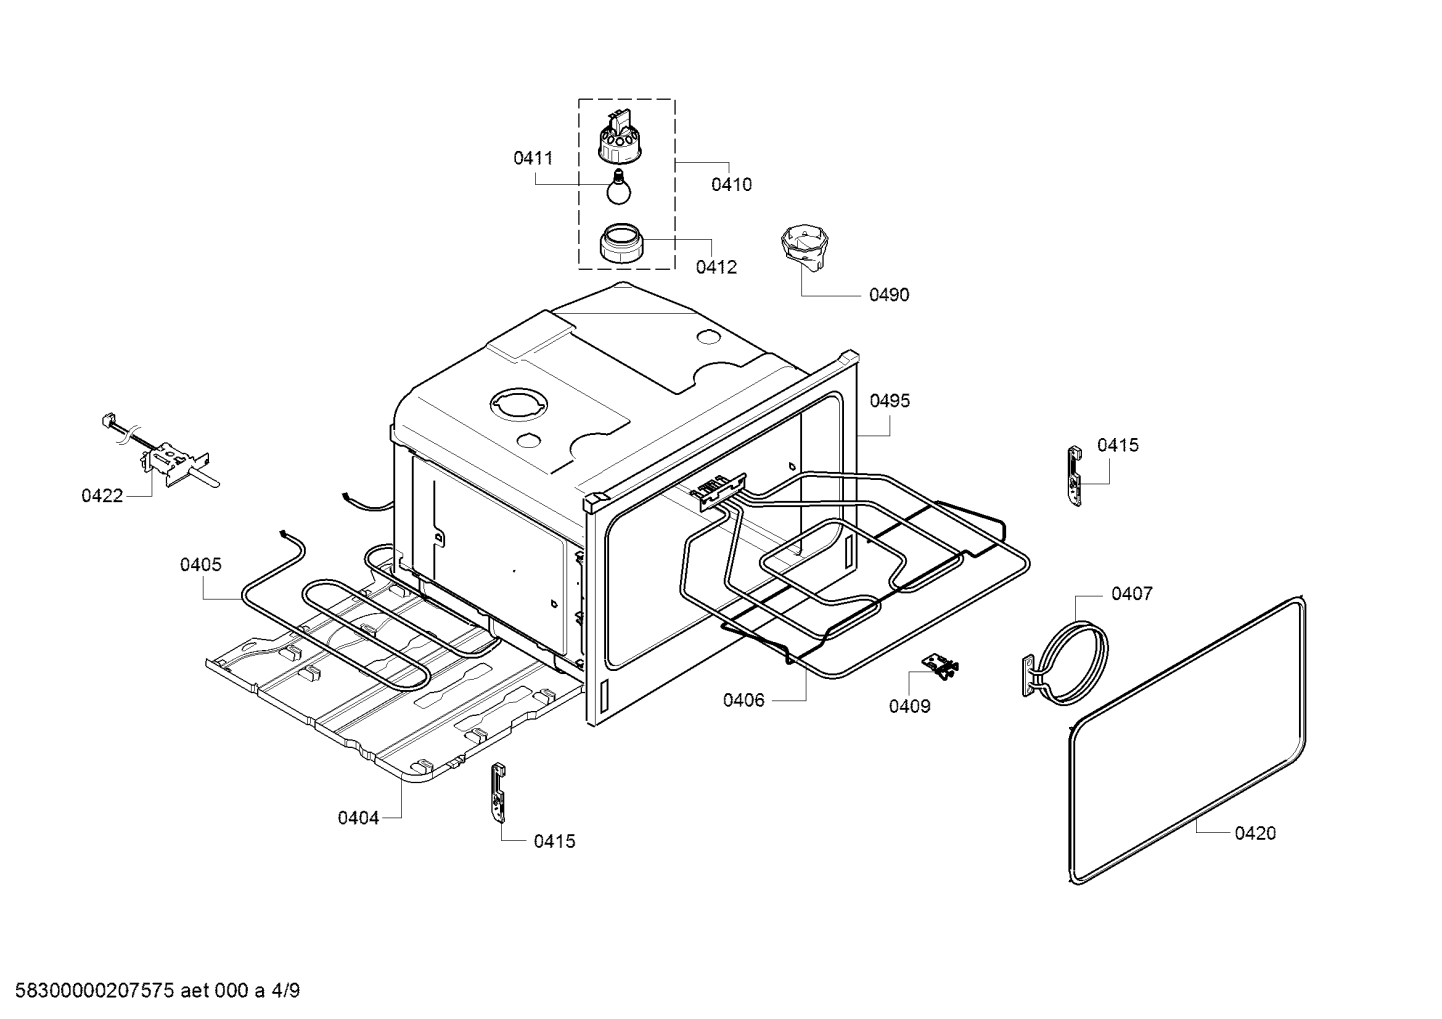 drawing_link_4_device_1823468